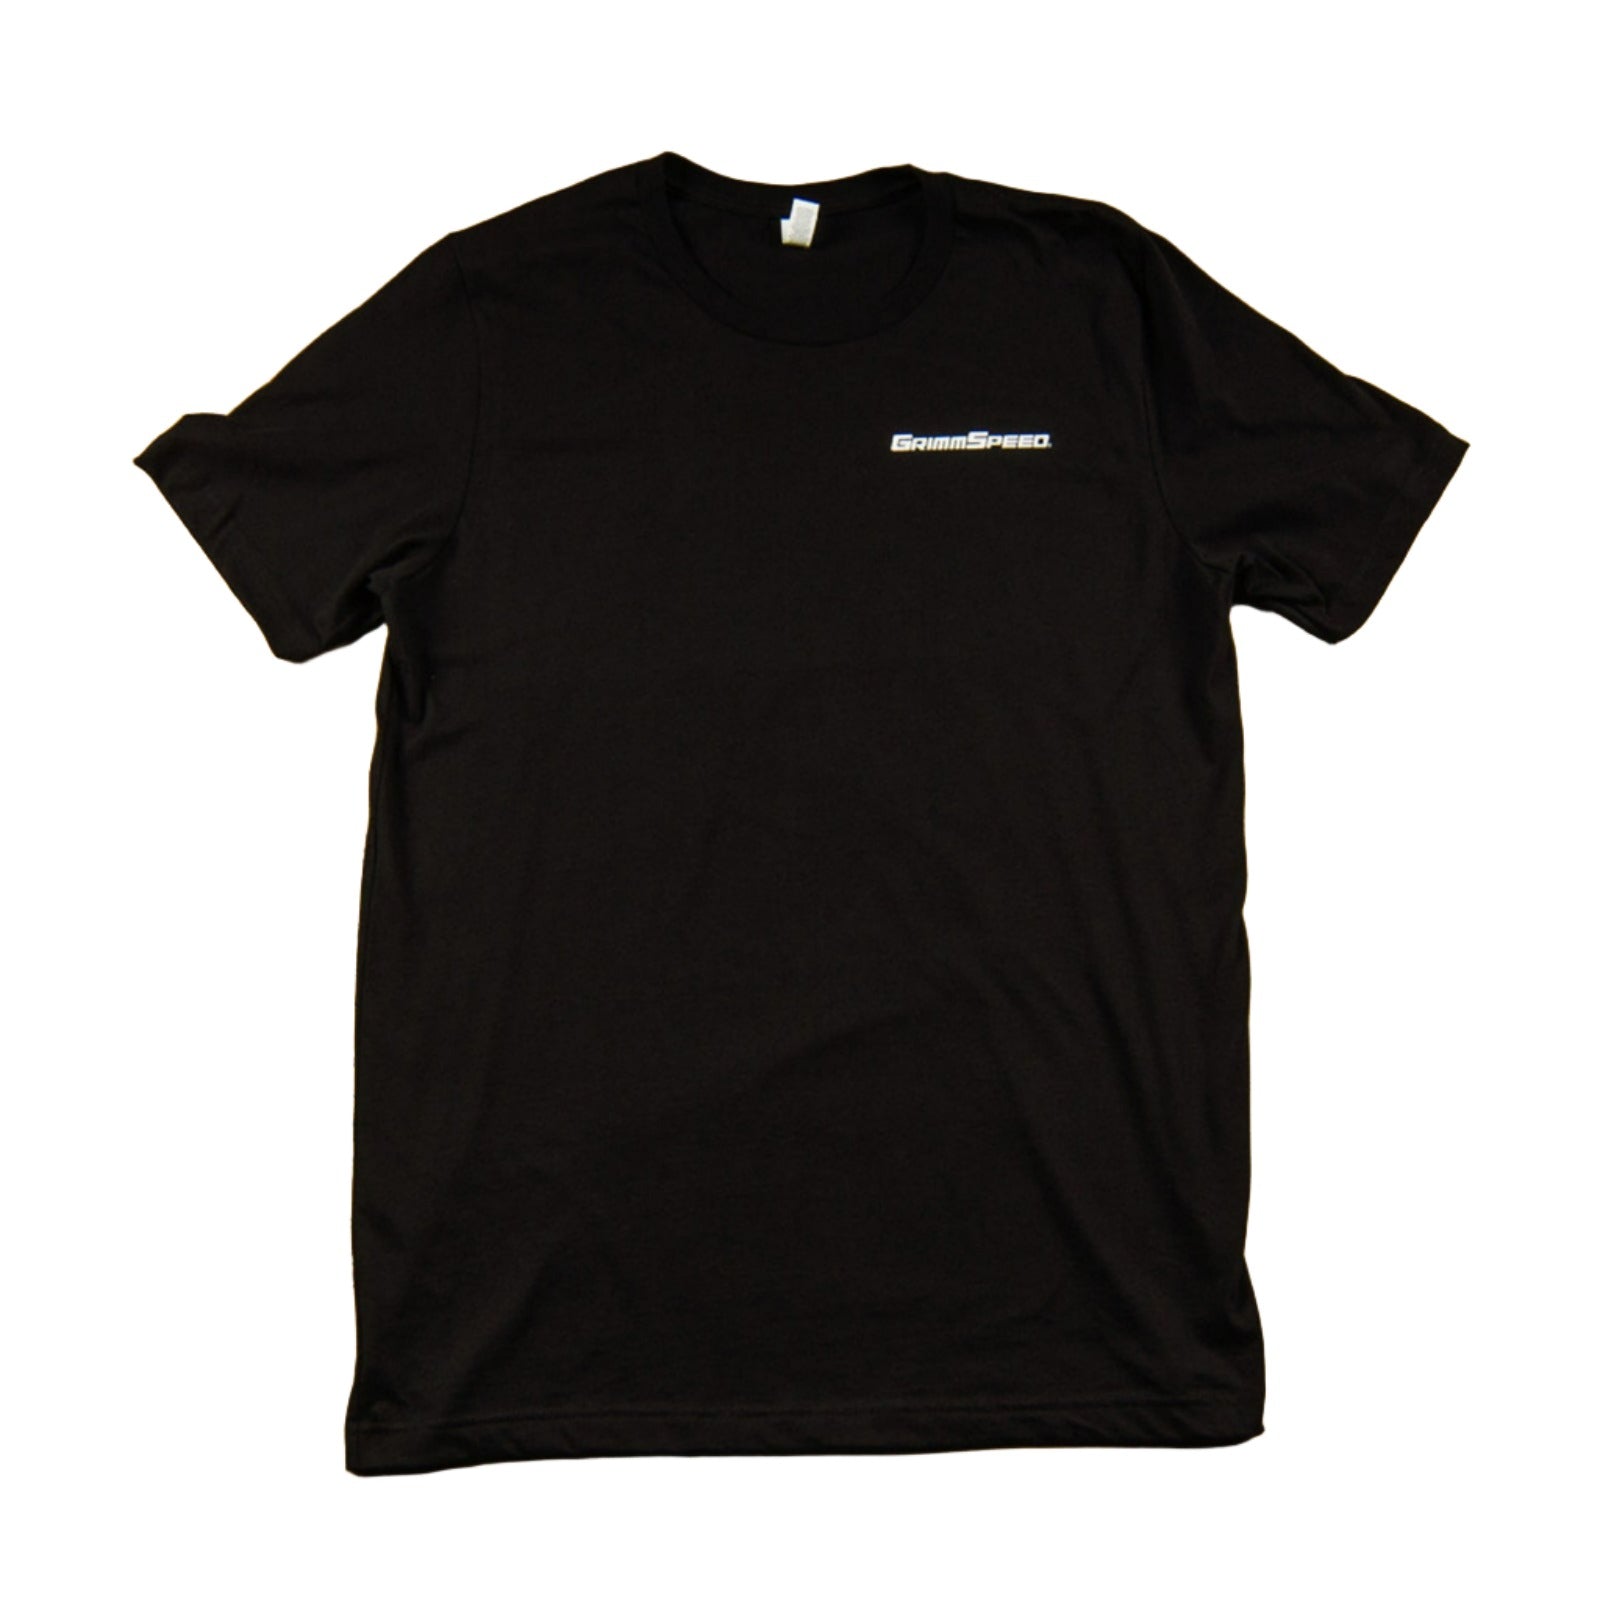 GrimmSpeed MFG "Hand-Made" T-Shirt Fitted - Black